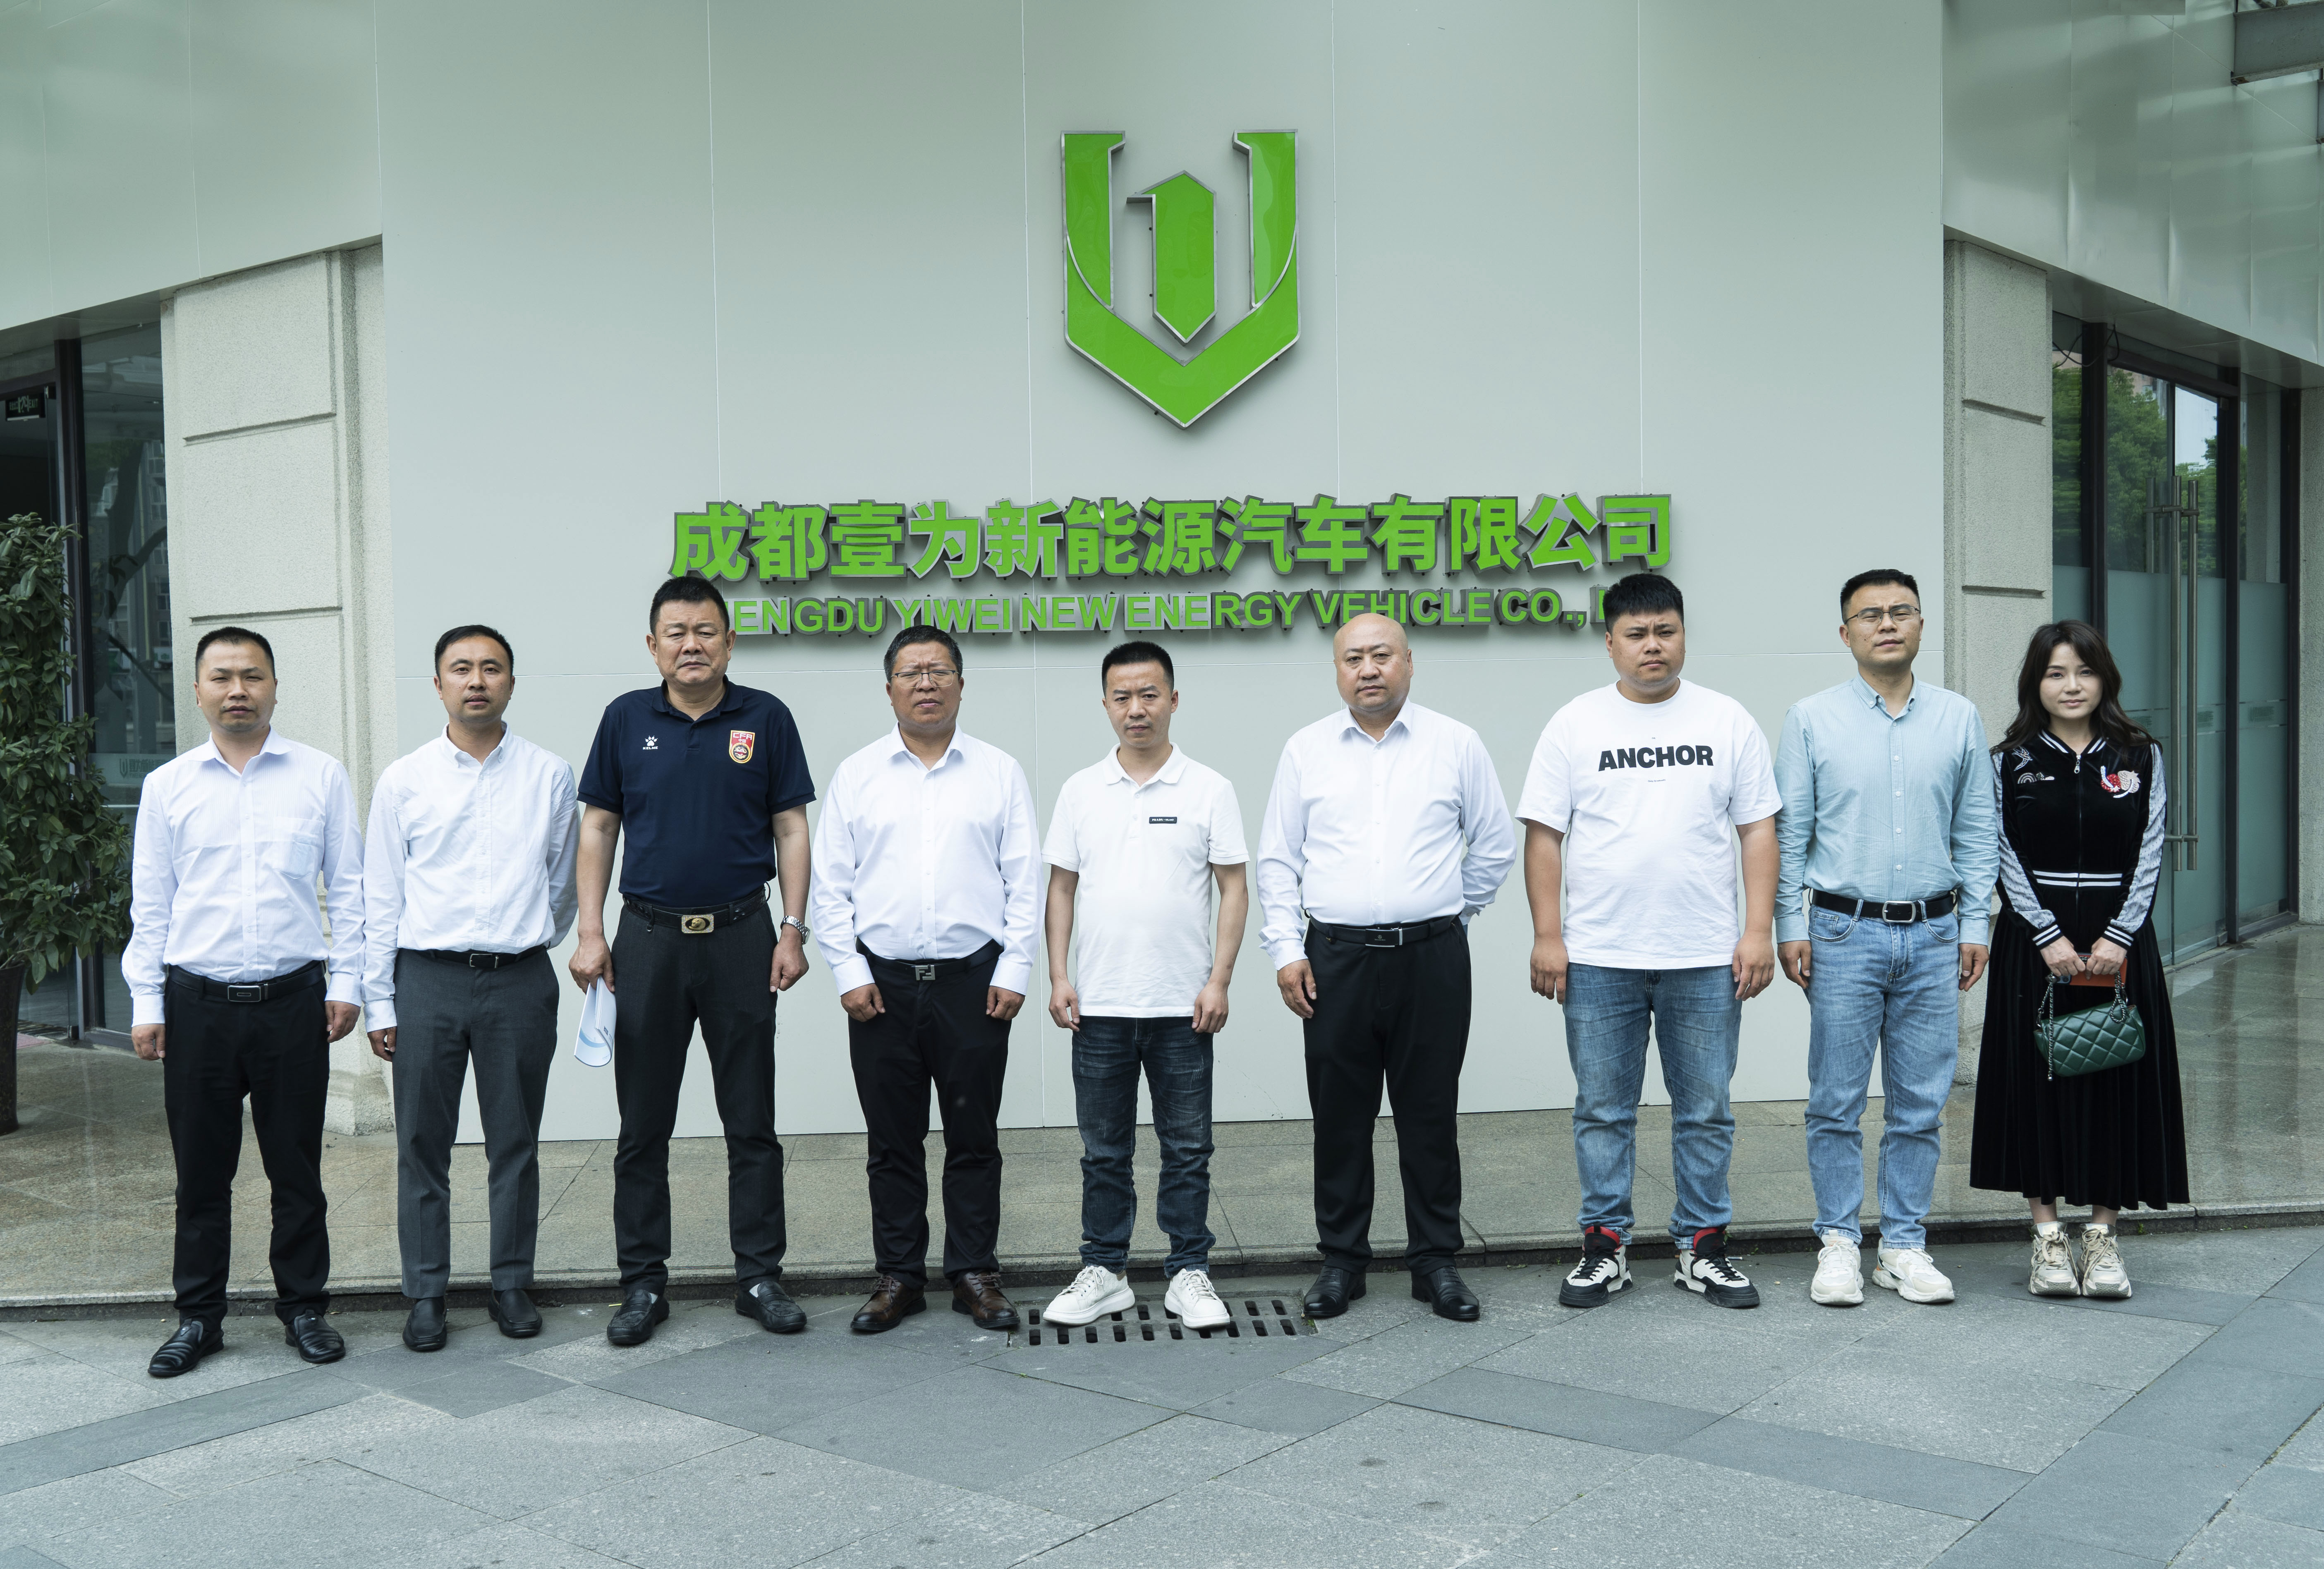 Warm Welcome to Chengdu Construction Material Recycling Chamber of Commerce at YIWEI Automobile, Paving the Way for Green Development